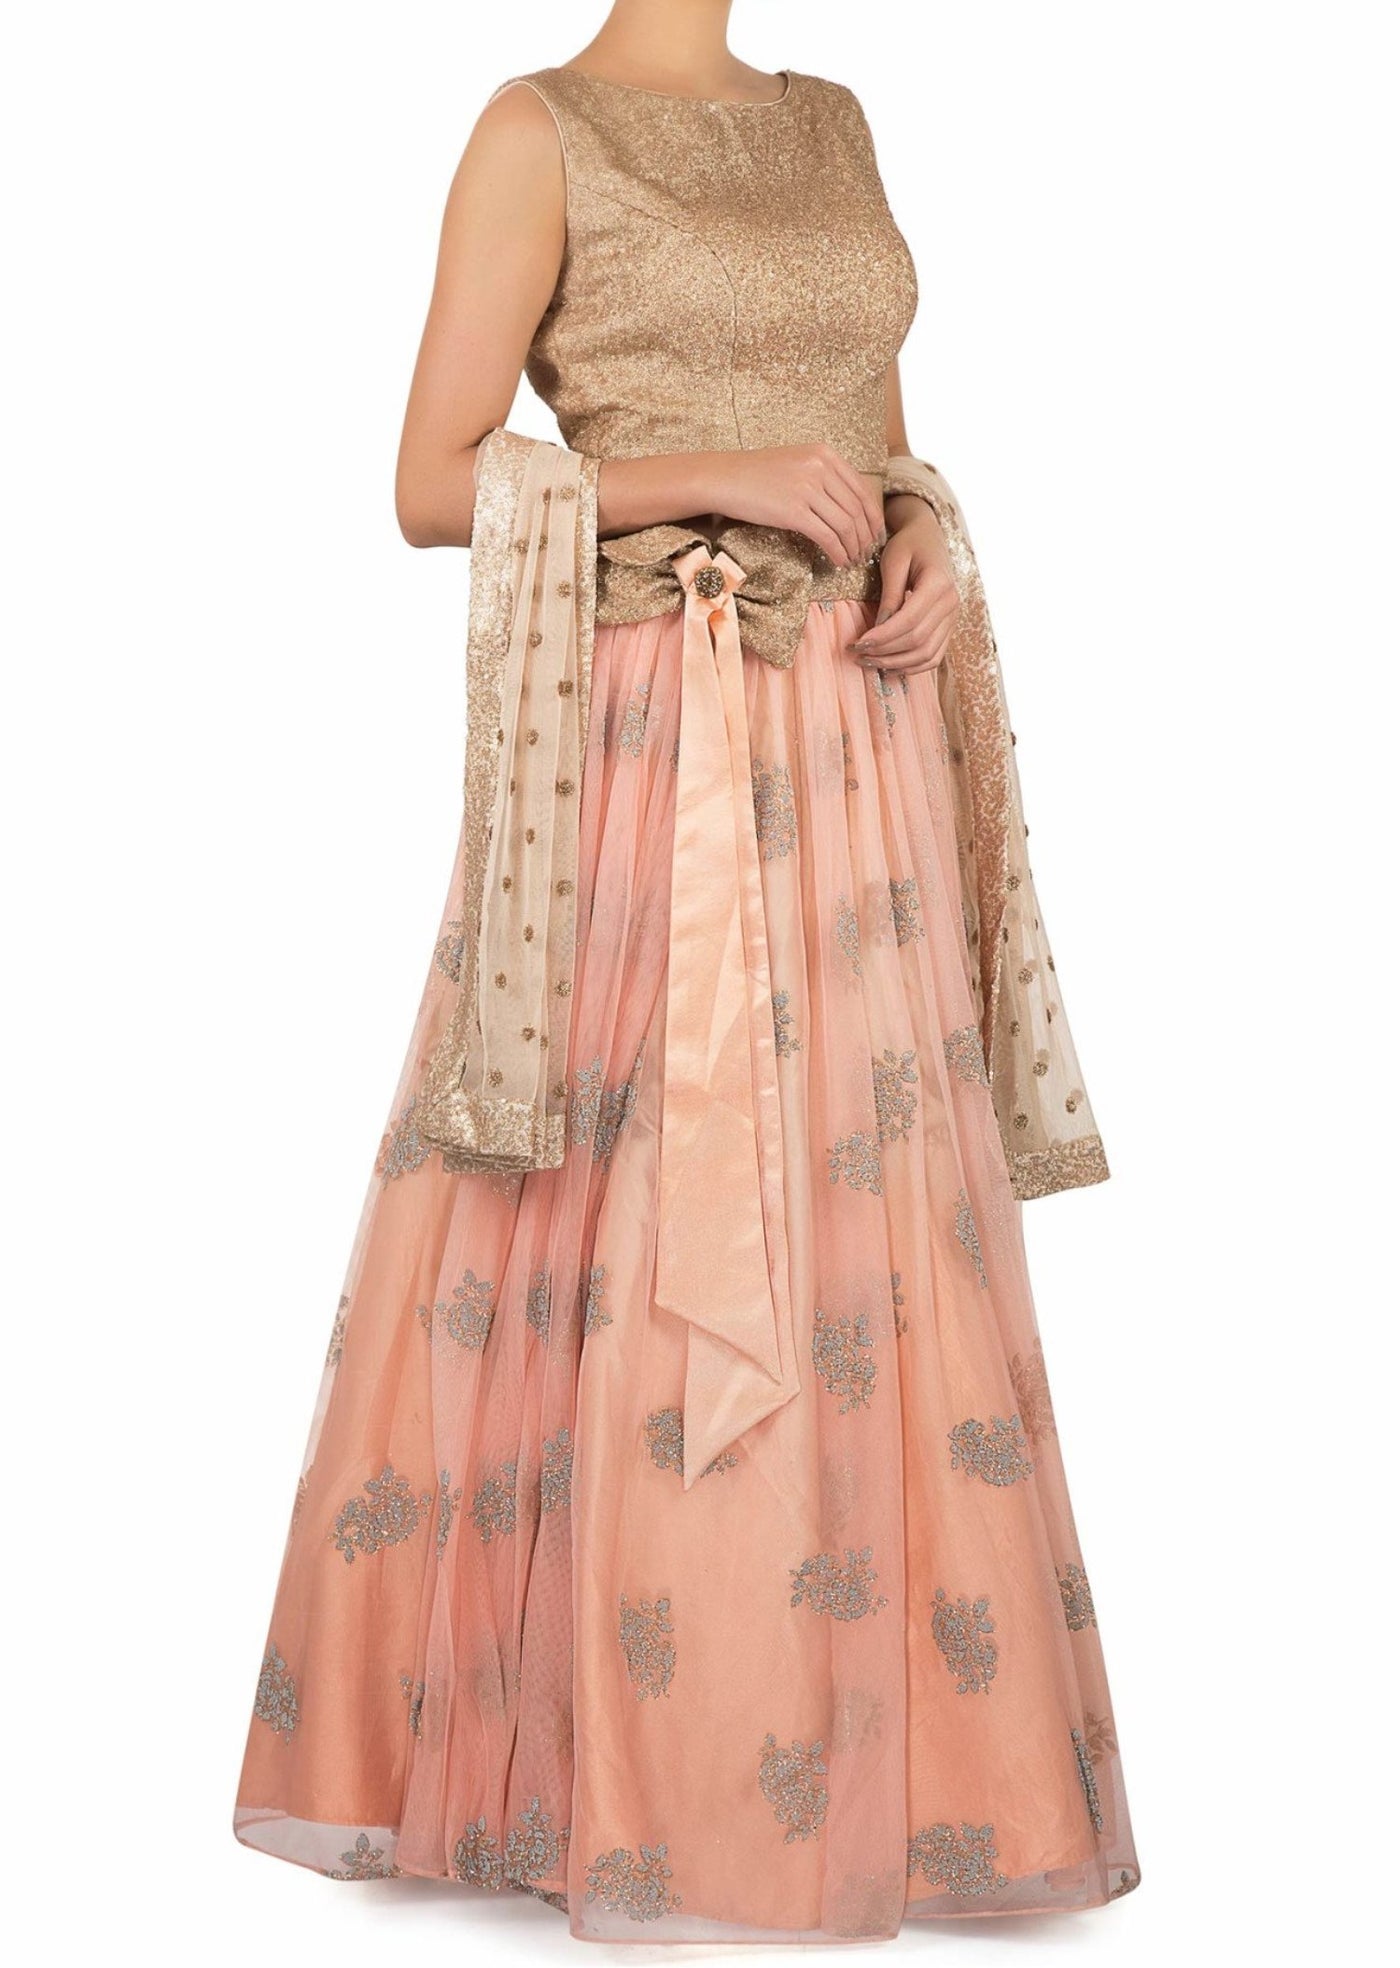 Peach lehenga in sequin work - Indian Clothing in Denver, CO, Aurora, CO, Boulder, CO, Fort Collins, CO, Colorado Springs, CO, Parker, CO, Highlands Ranch, CO, Cherry Creek, CO, Centennial, CO, and Longmont, CO. Nationwide shipping USA - India Fashion X